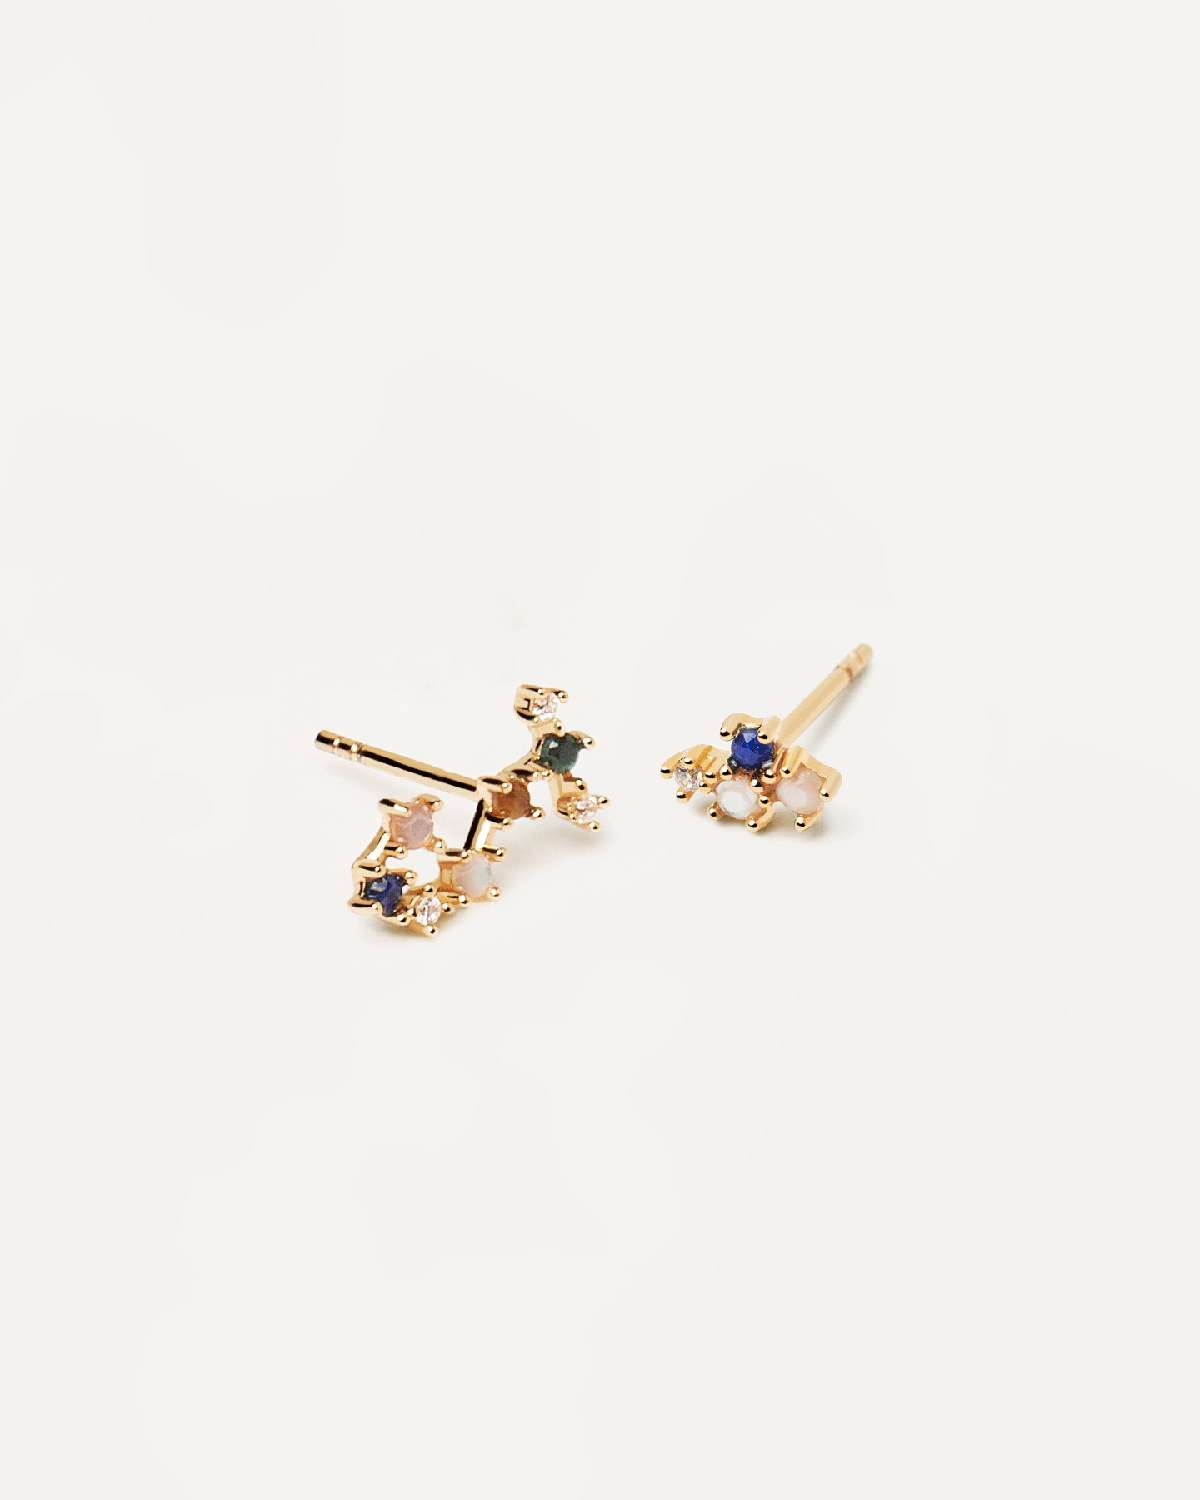 2021 Selection | Scorpio Earrings. Get the latest arrival from PDPAOLA. Place your order safely and get this Best Seller. Free Shipping over 70€